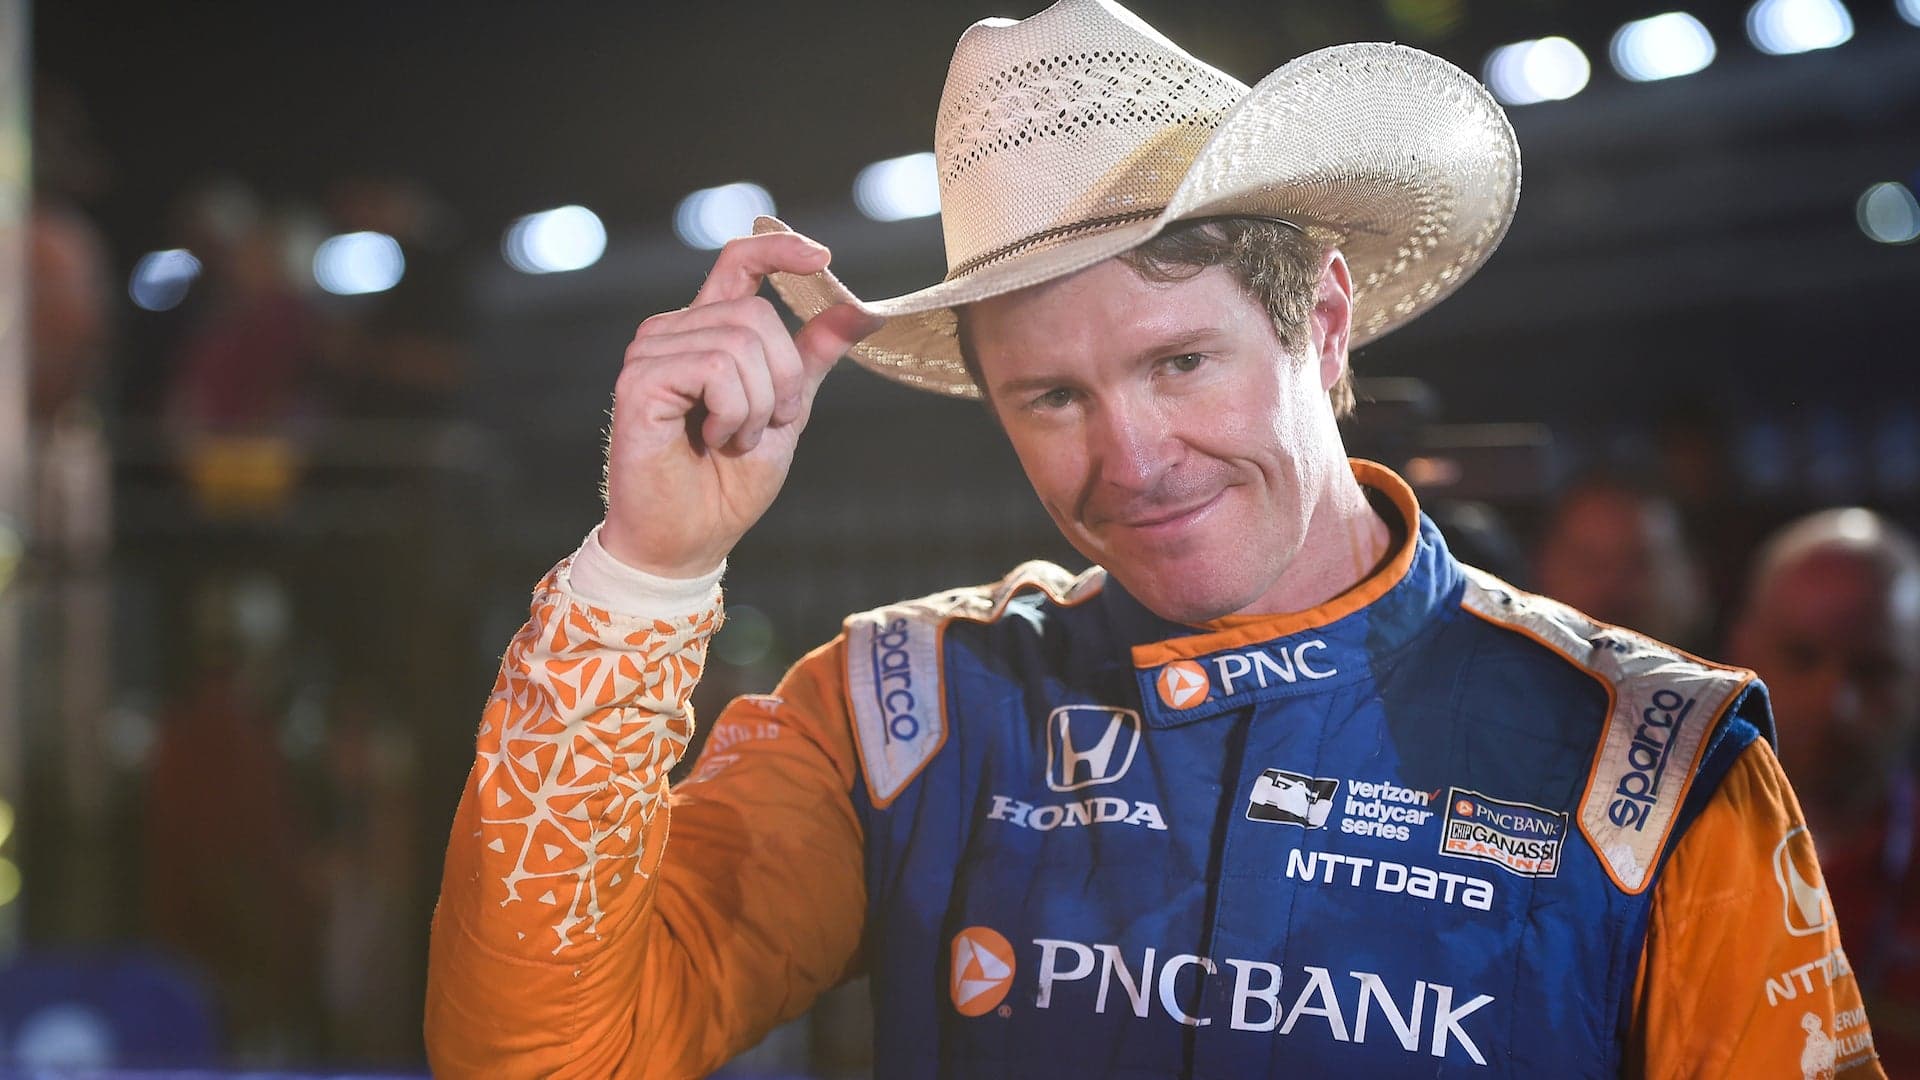 McLaren Tapped IndyCar Champ Scott Dixon for Possible 2019 Ride: Report